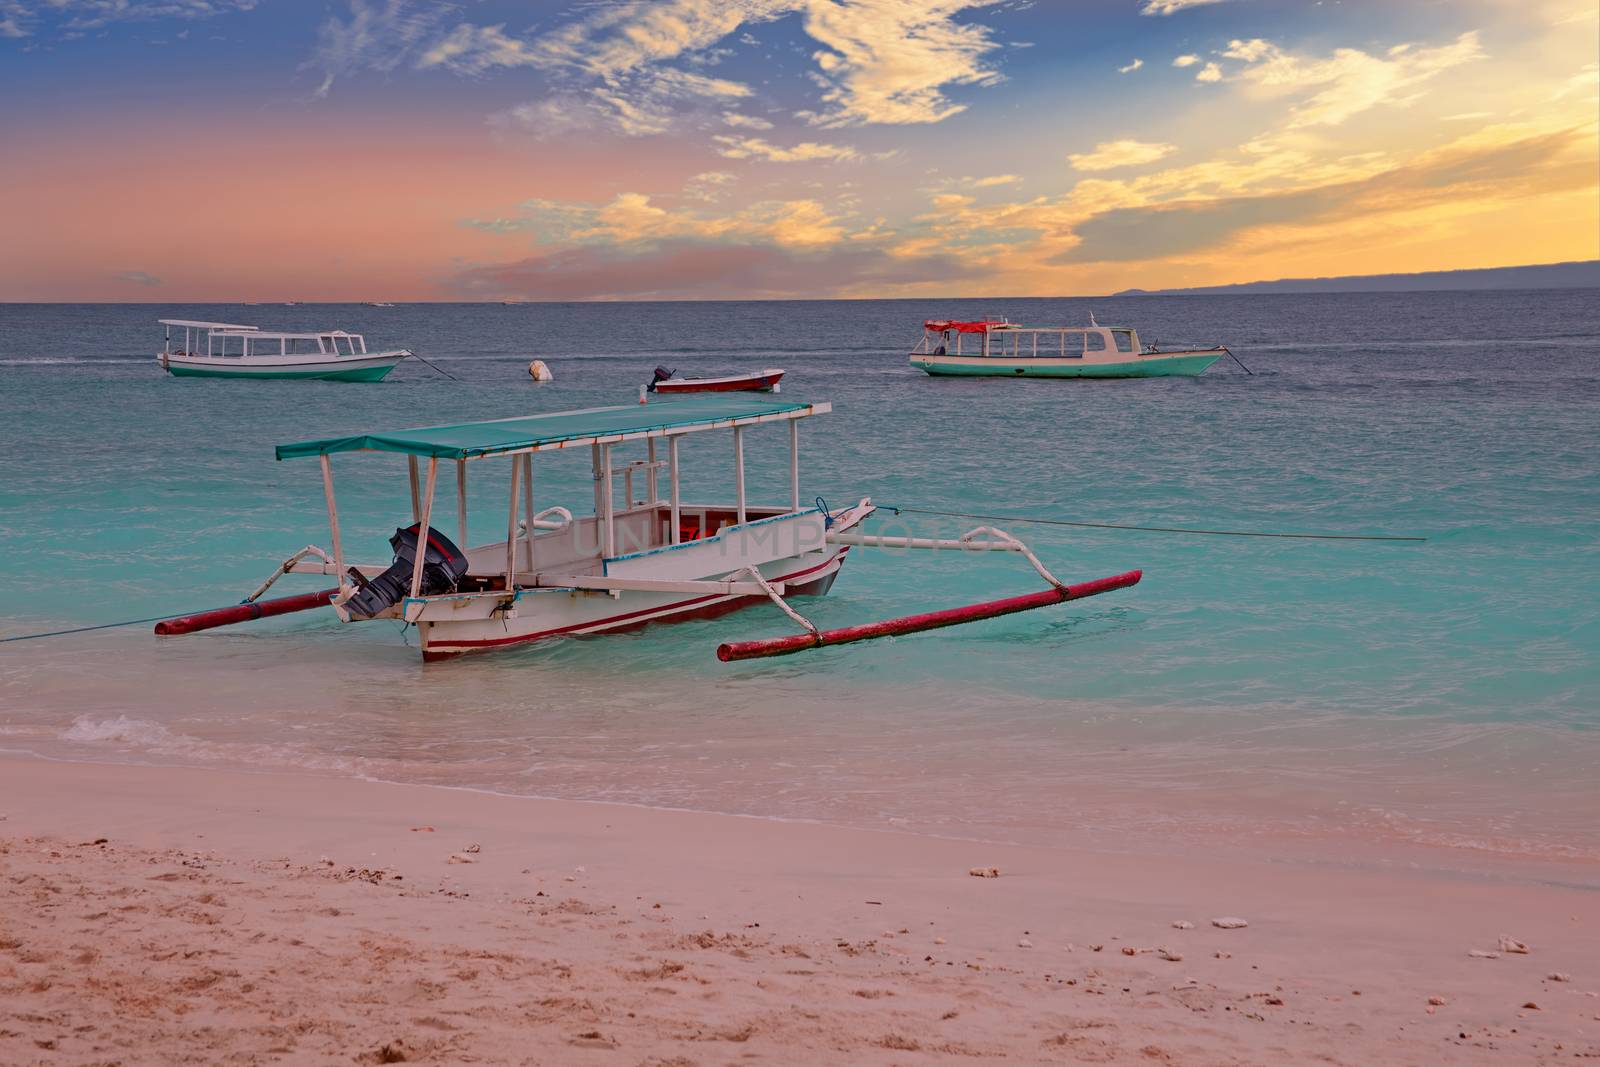 Traditional boat on Gili Meno island beach, Indonesia at sunset by devy